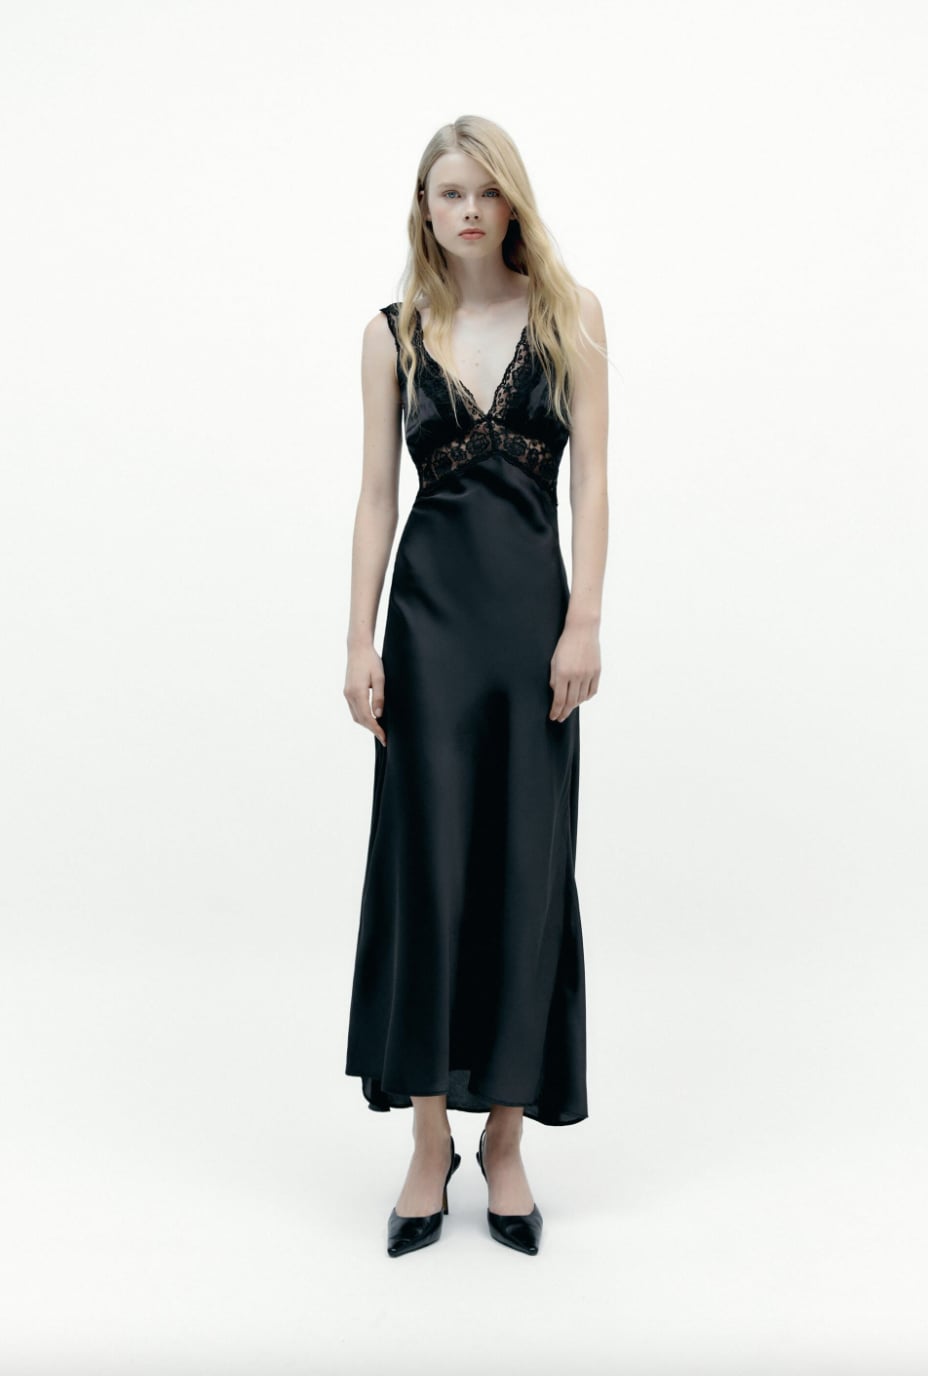 A Romantic Dress: Zara Satin Effect Dress With Lace, 11 New Arrivals From  Zara to Shop (and Gift!) This December